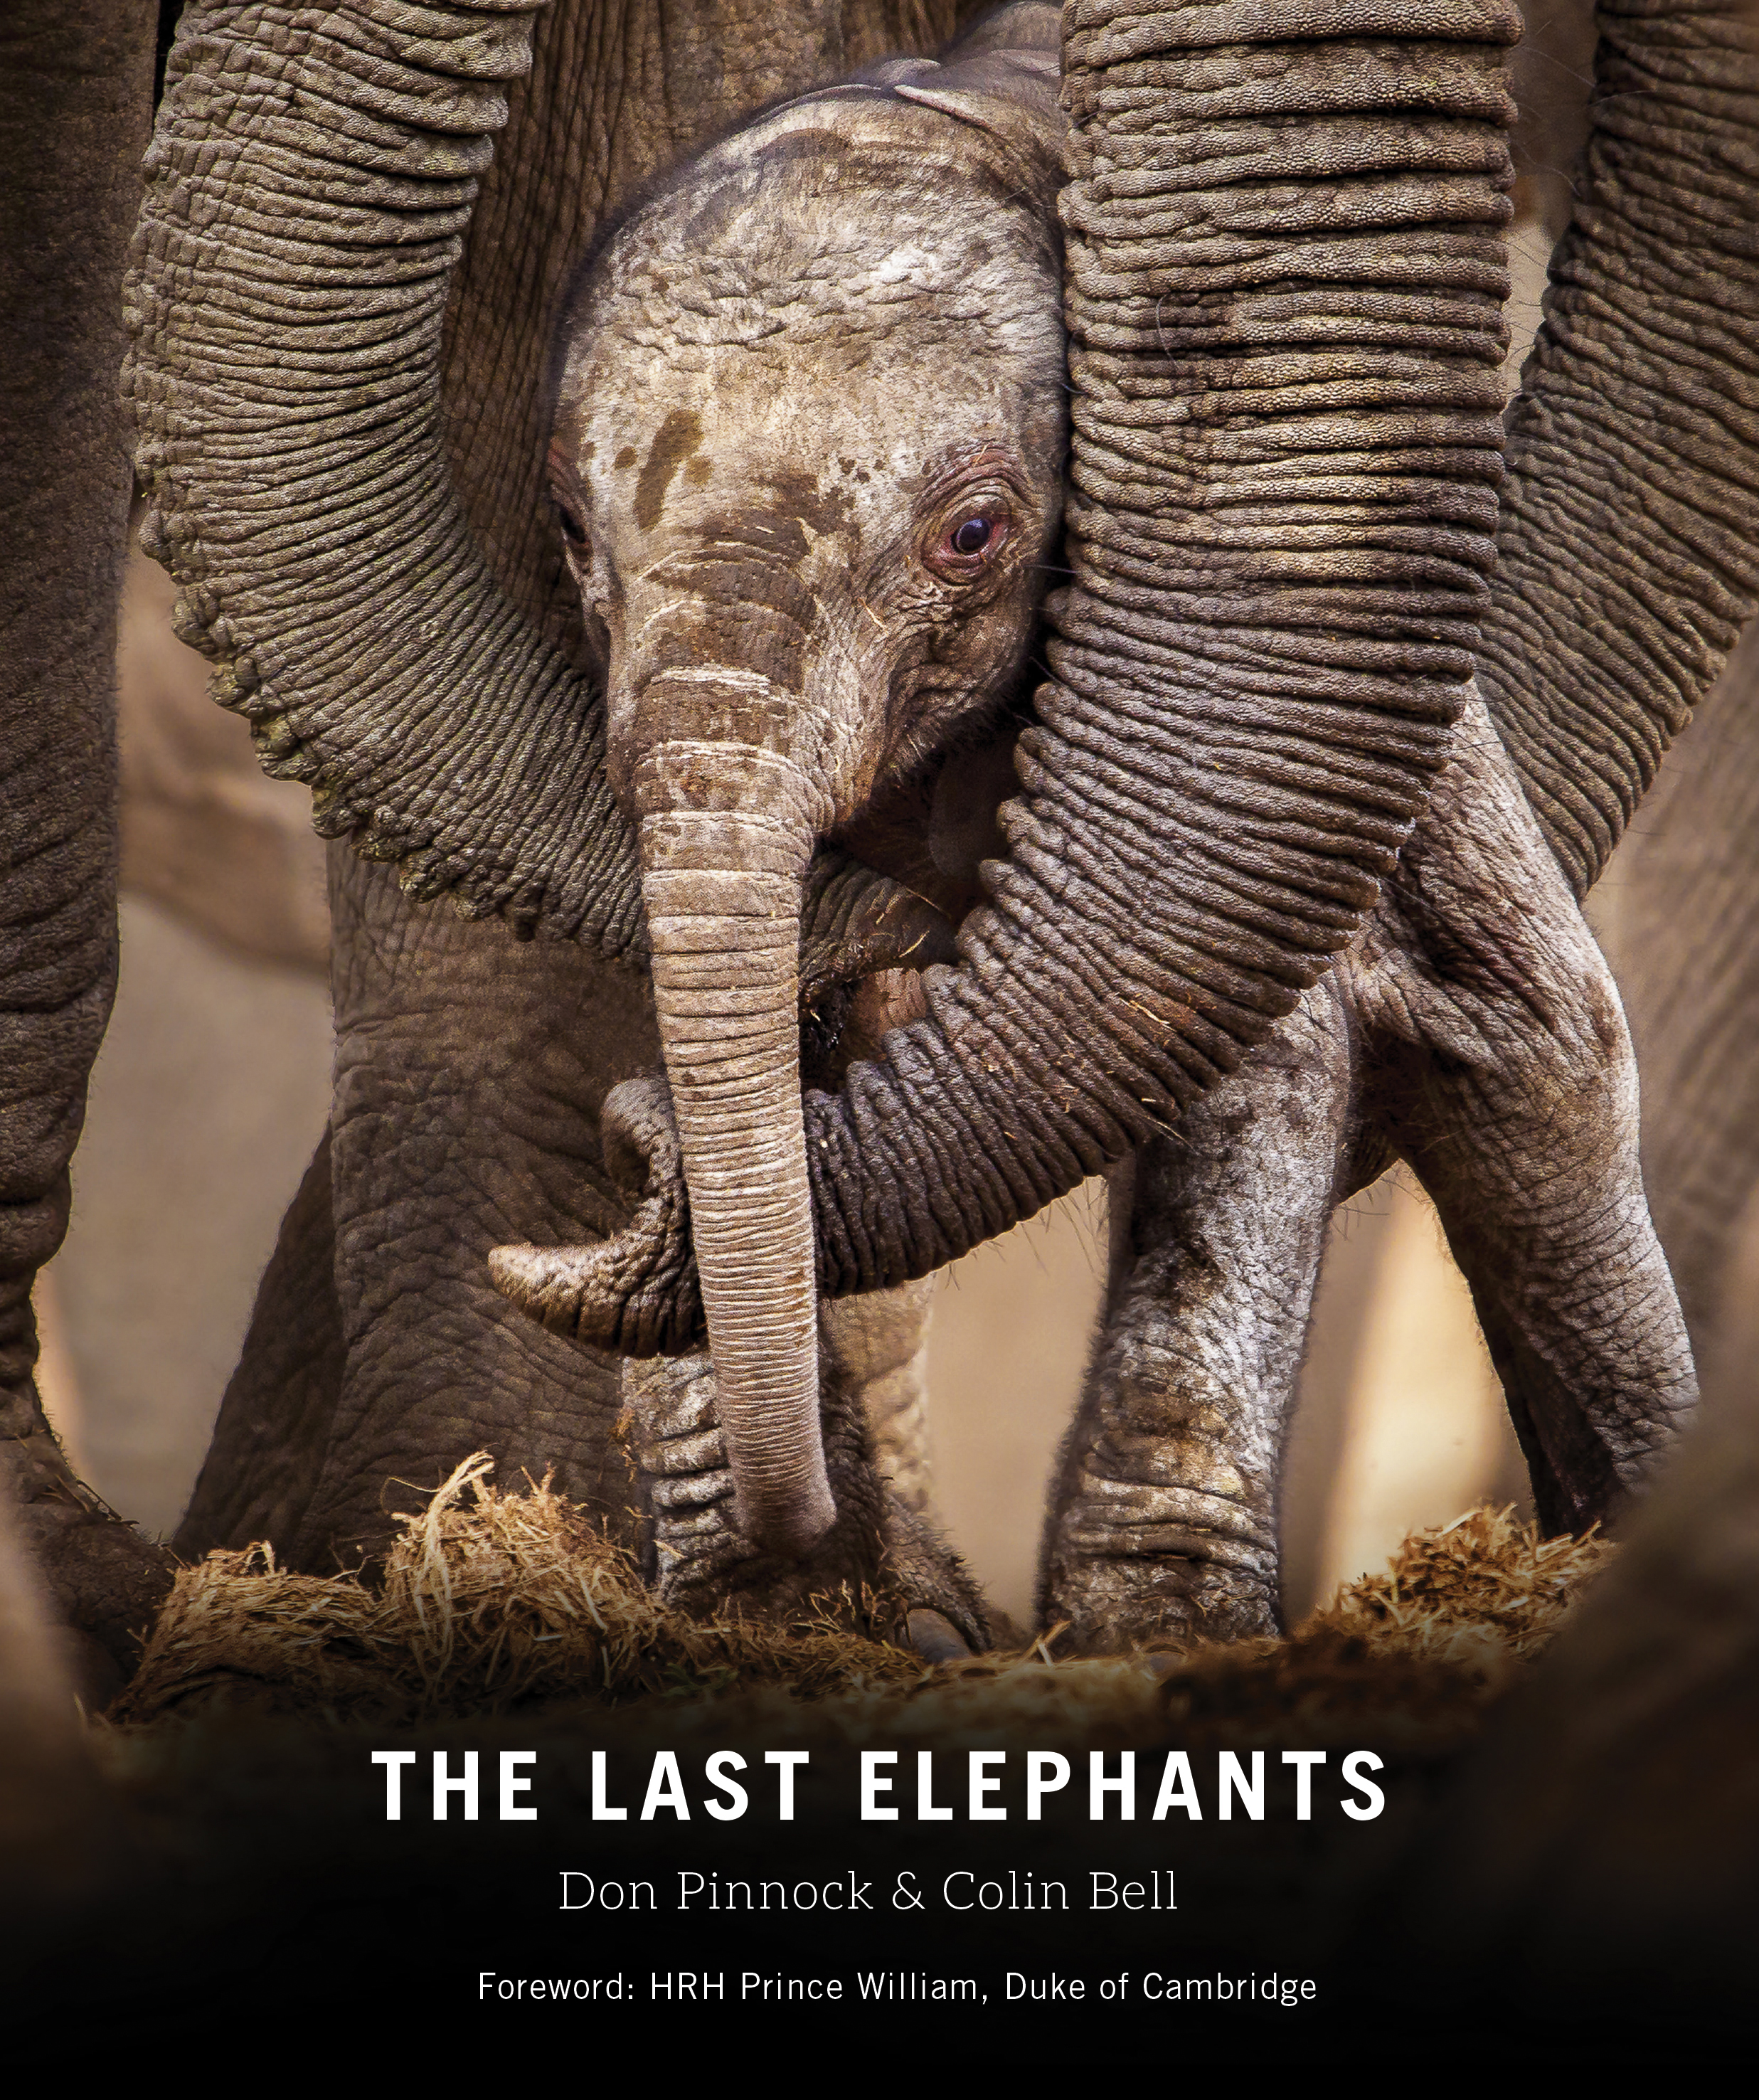 The Last Elephants book cover